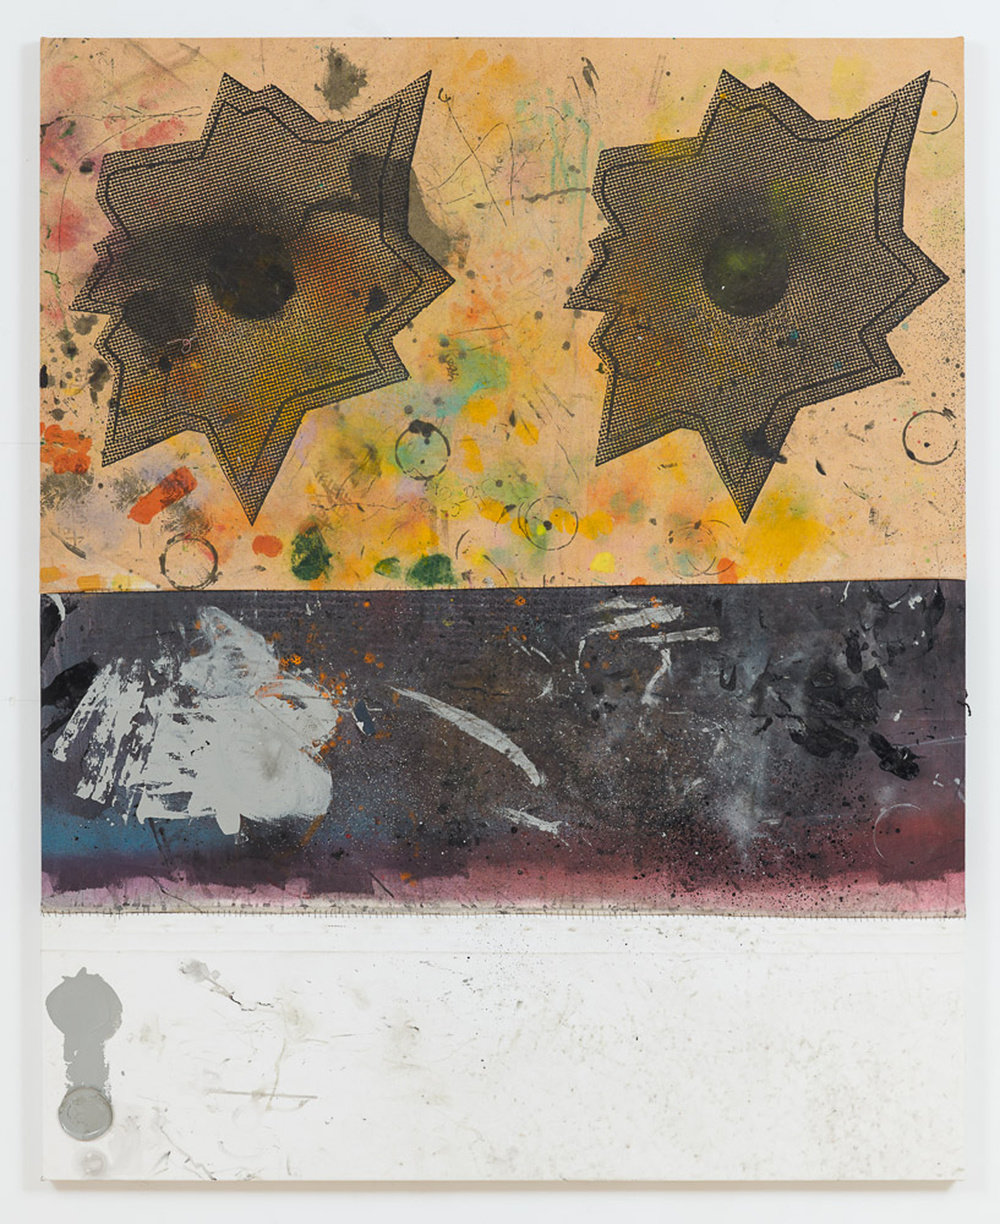 Lowman, (tbt   double stitched bullethole), 2013, oil, silkscreen ink, dirt, tape, enamel and dental floss on canvas, 78 x 63 in. 198.12 x 160 cm